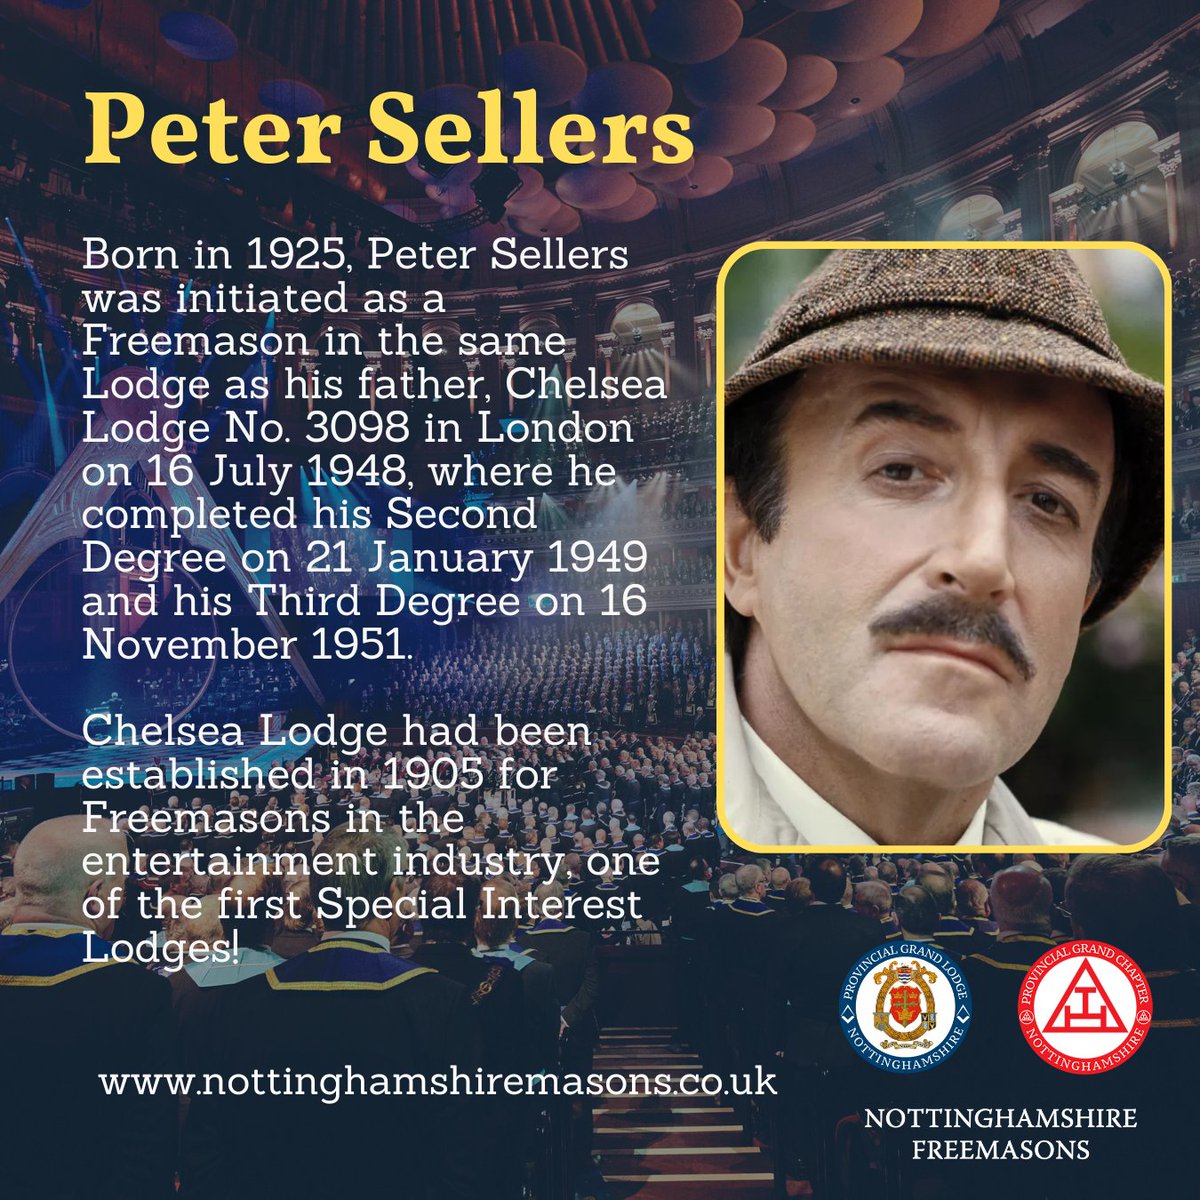 Peter Sellers was initiated as a Freemason in the same Lodge as his father, Chelsea Lodge No. 3098, in London on 16th July 1948, a special interest Lodge for Freemasons in the entertainment industry Learn More and Join Us nottinghamshiremasons.co.uk #Freemasons